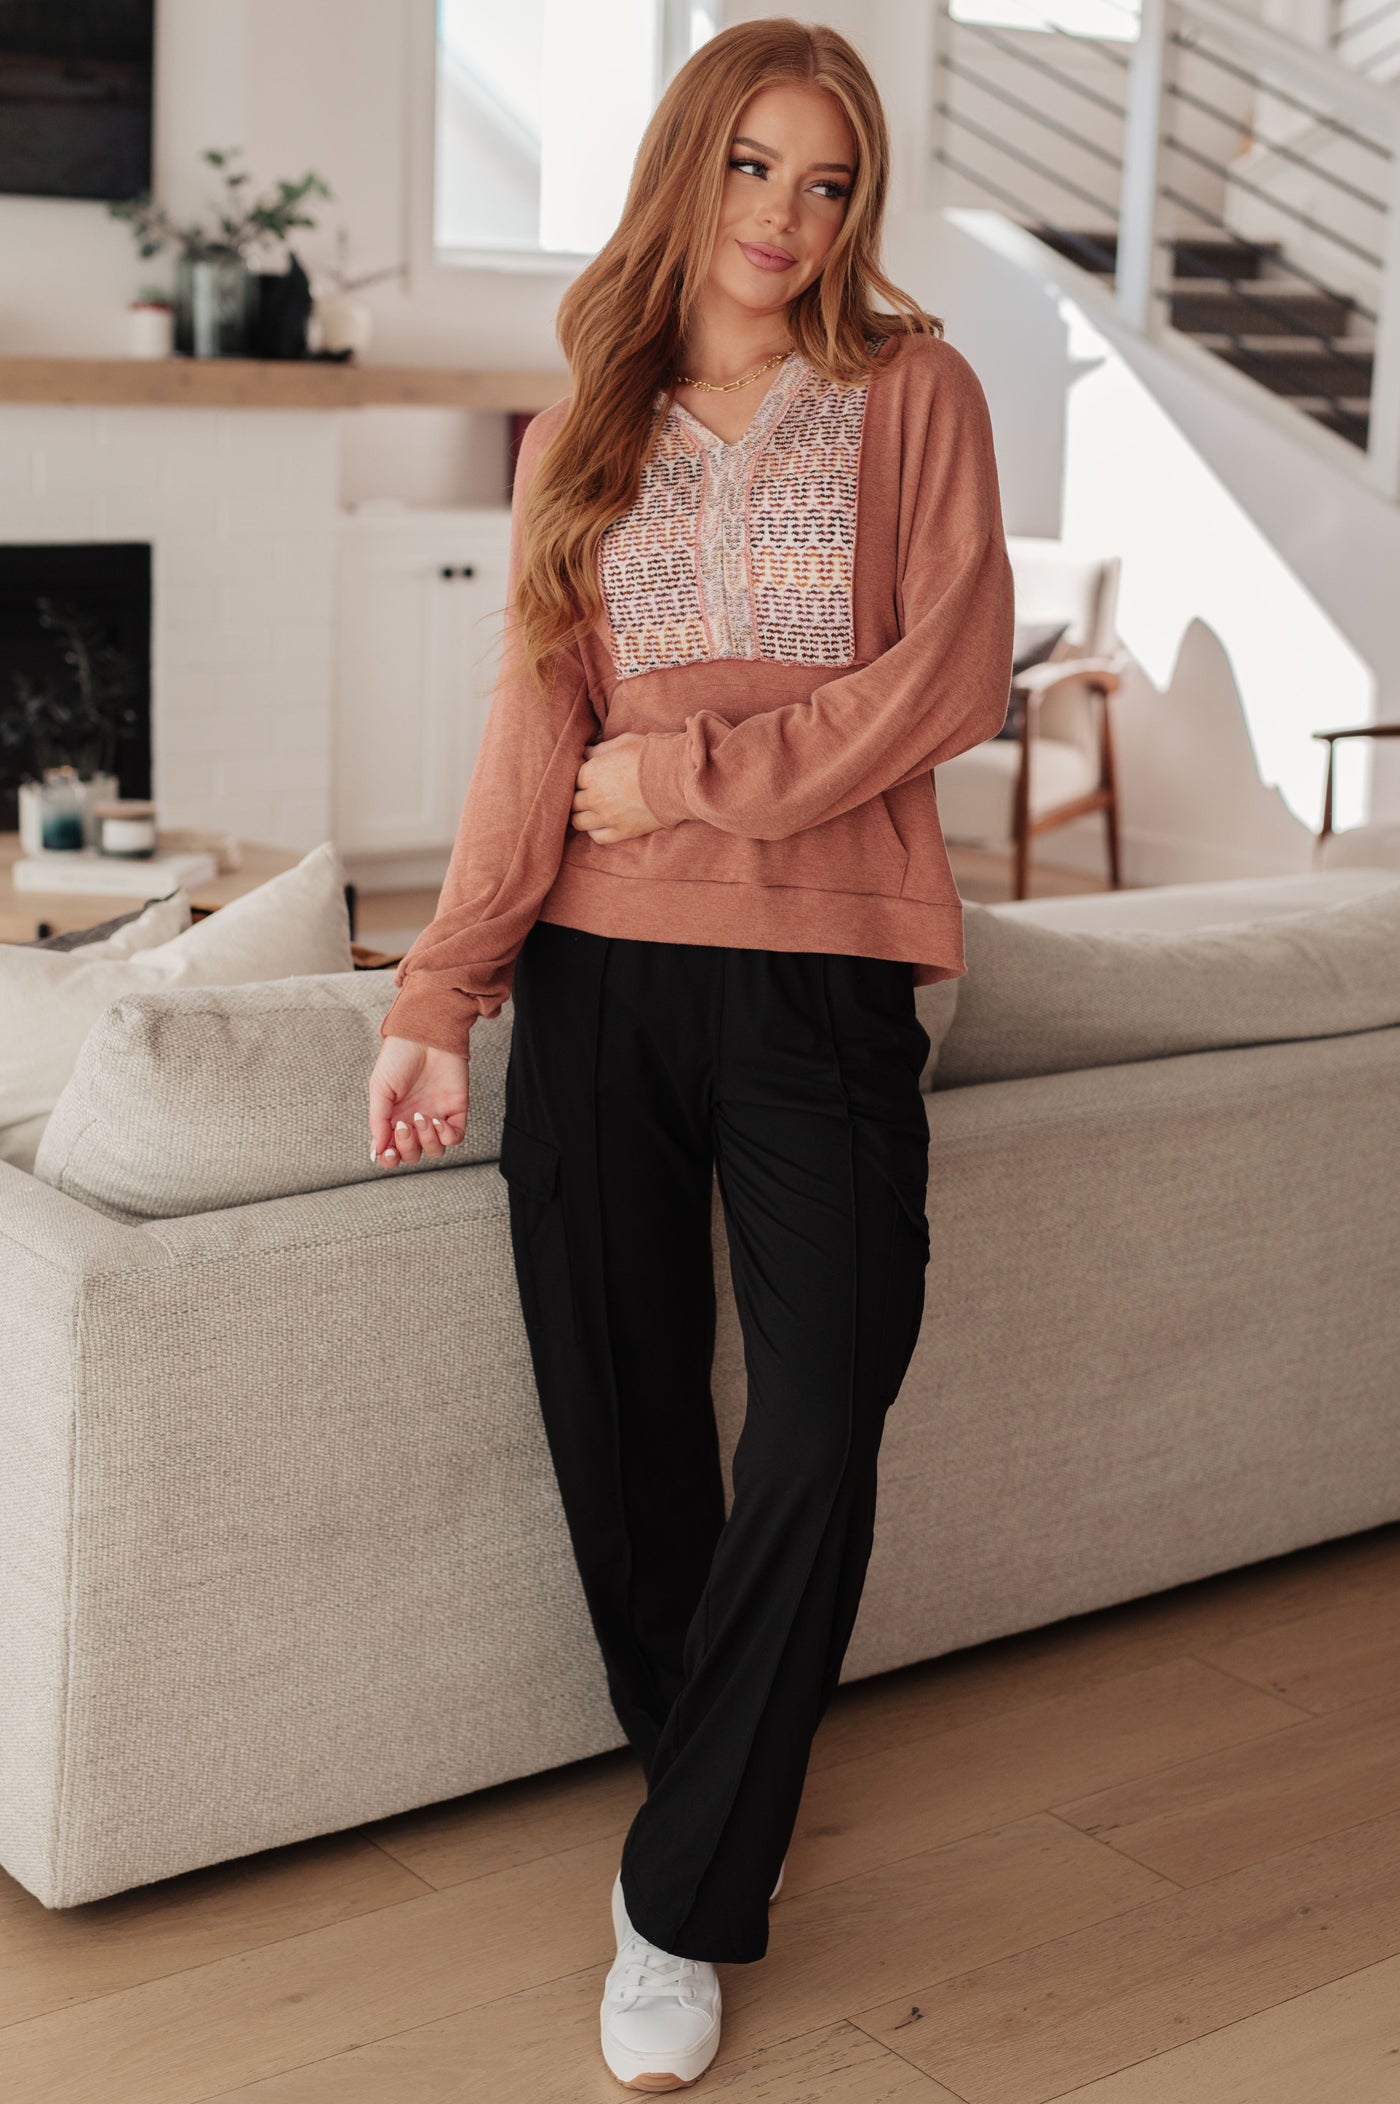 This Wave Hello Hoodie is ideal for any occasion. Crafted in a soft jersey knit with a hooded V-Neckline, kangaroo pocket, and a unique multicolored textured panel, it's sure to become your go-to piece